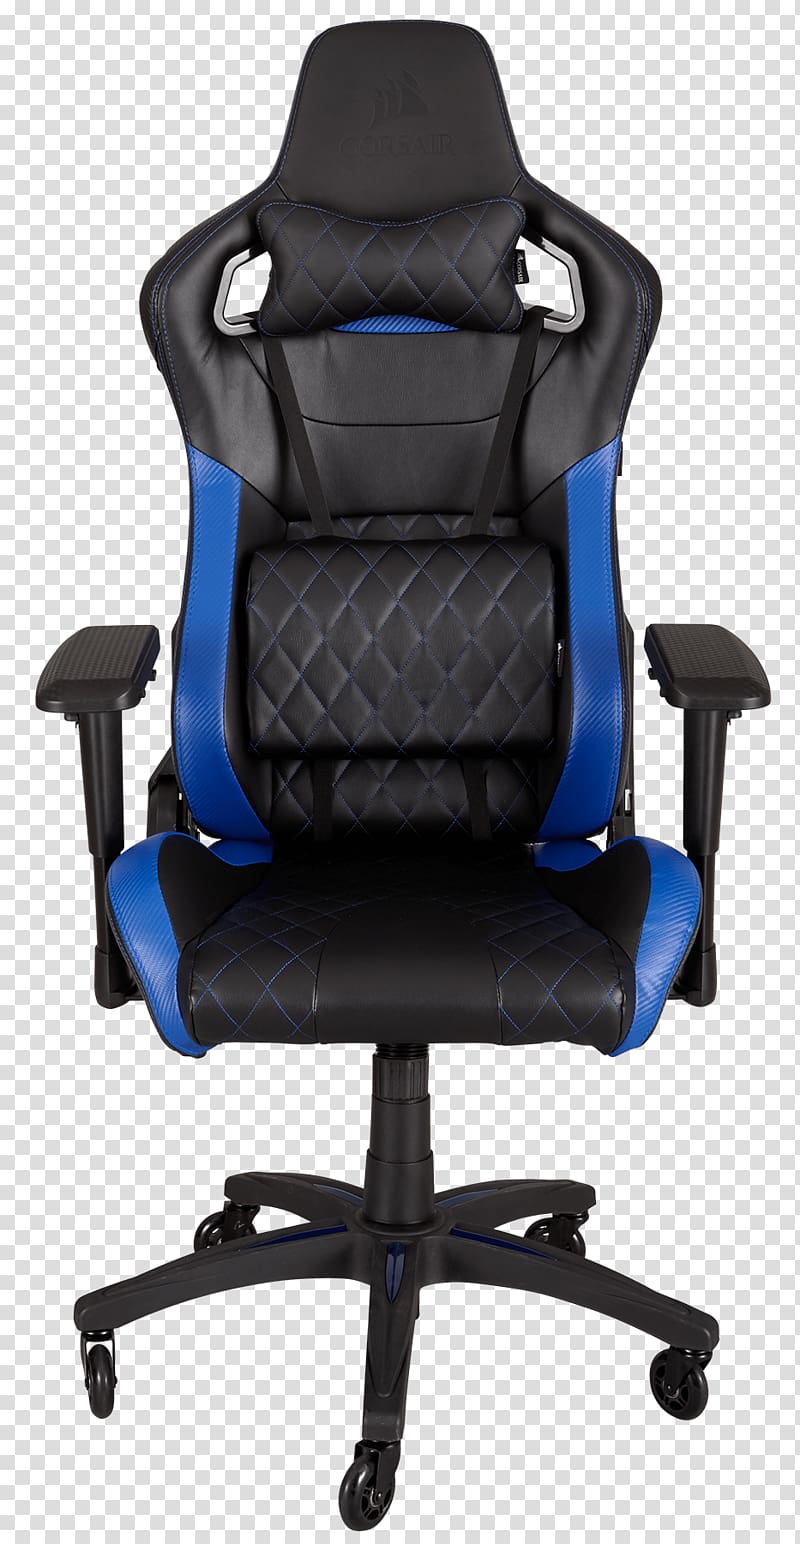 Gaming chair Furniture Video game Caster, chair transparent background PNG clipart